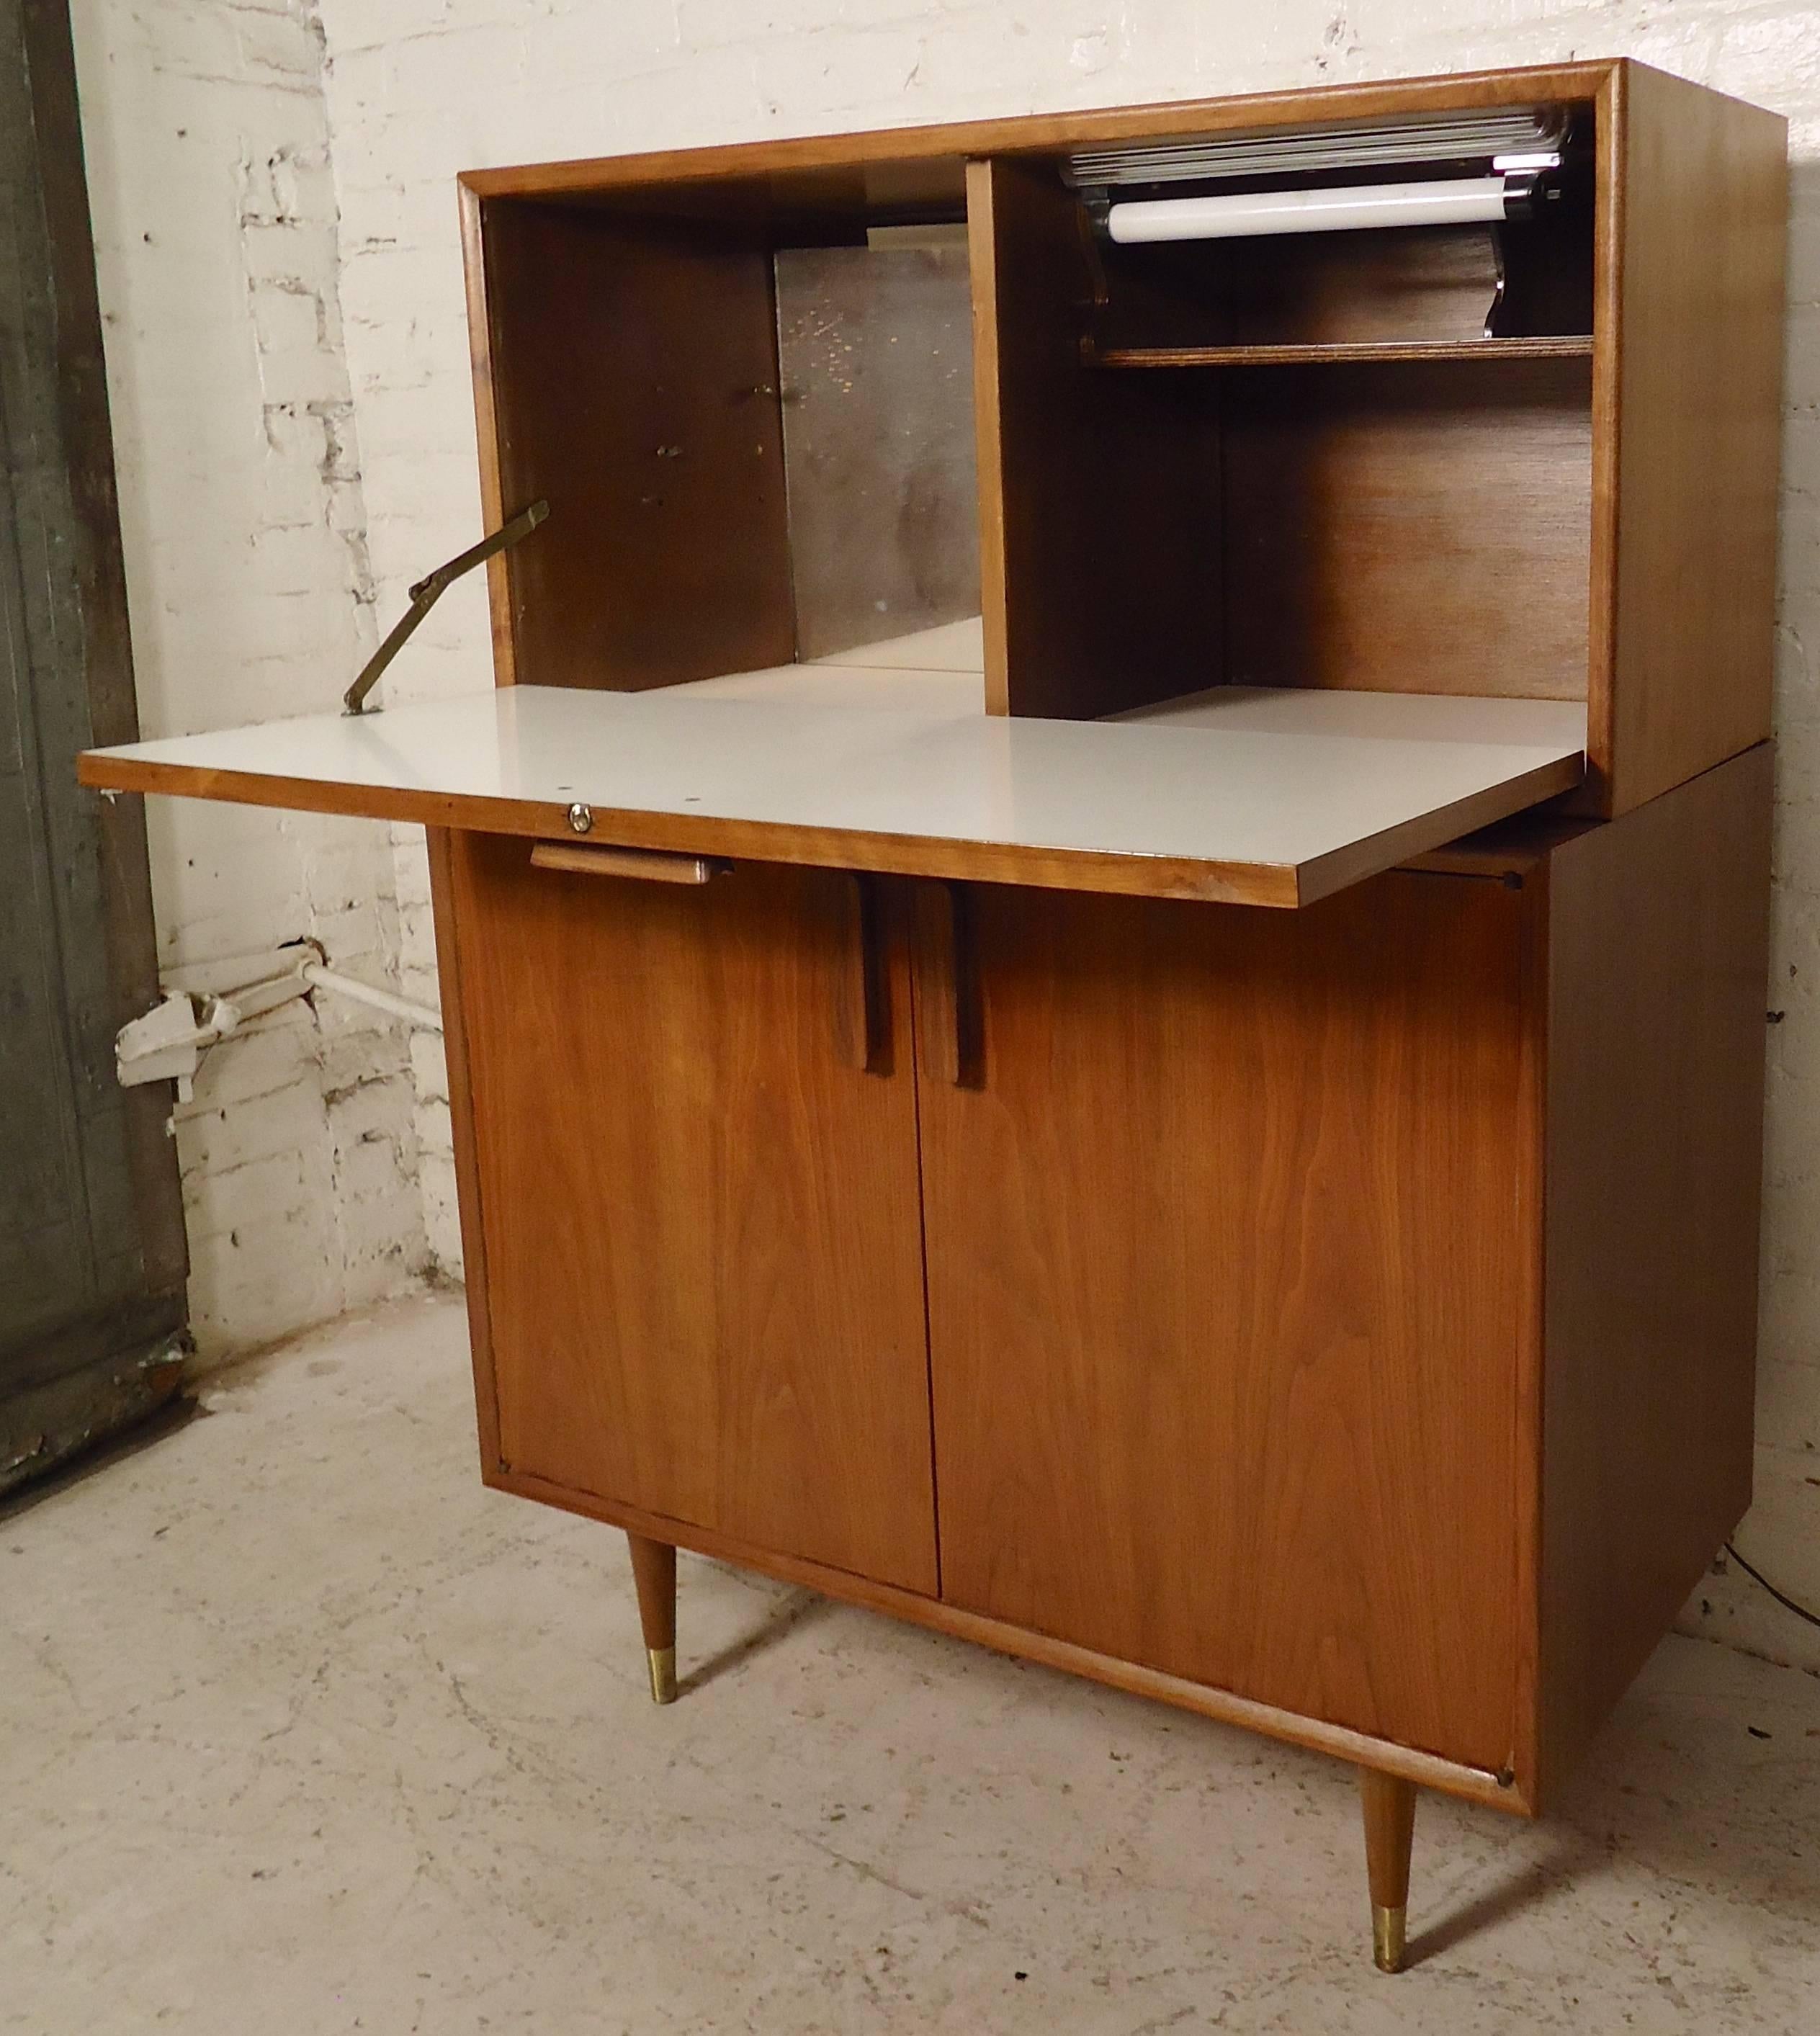 Vintage modern teak cabinet with drop front bar top. Very unique 1960s bar featuring mirrored back for glasses, lamp, bottom cabinet with adjustable shelf, sculpted handles and cone legs. Top rests on the bottom cabinet.

(Please confirm item